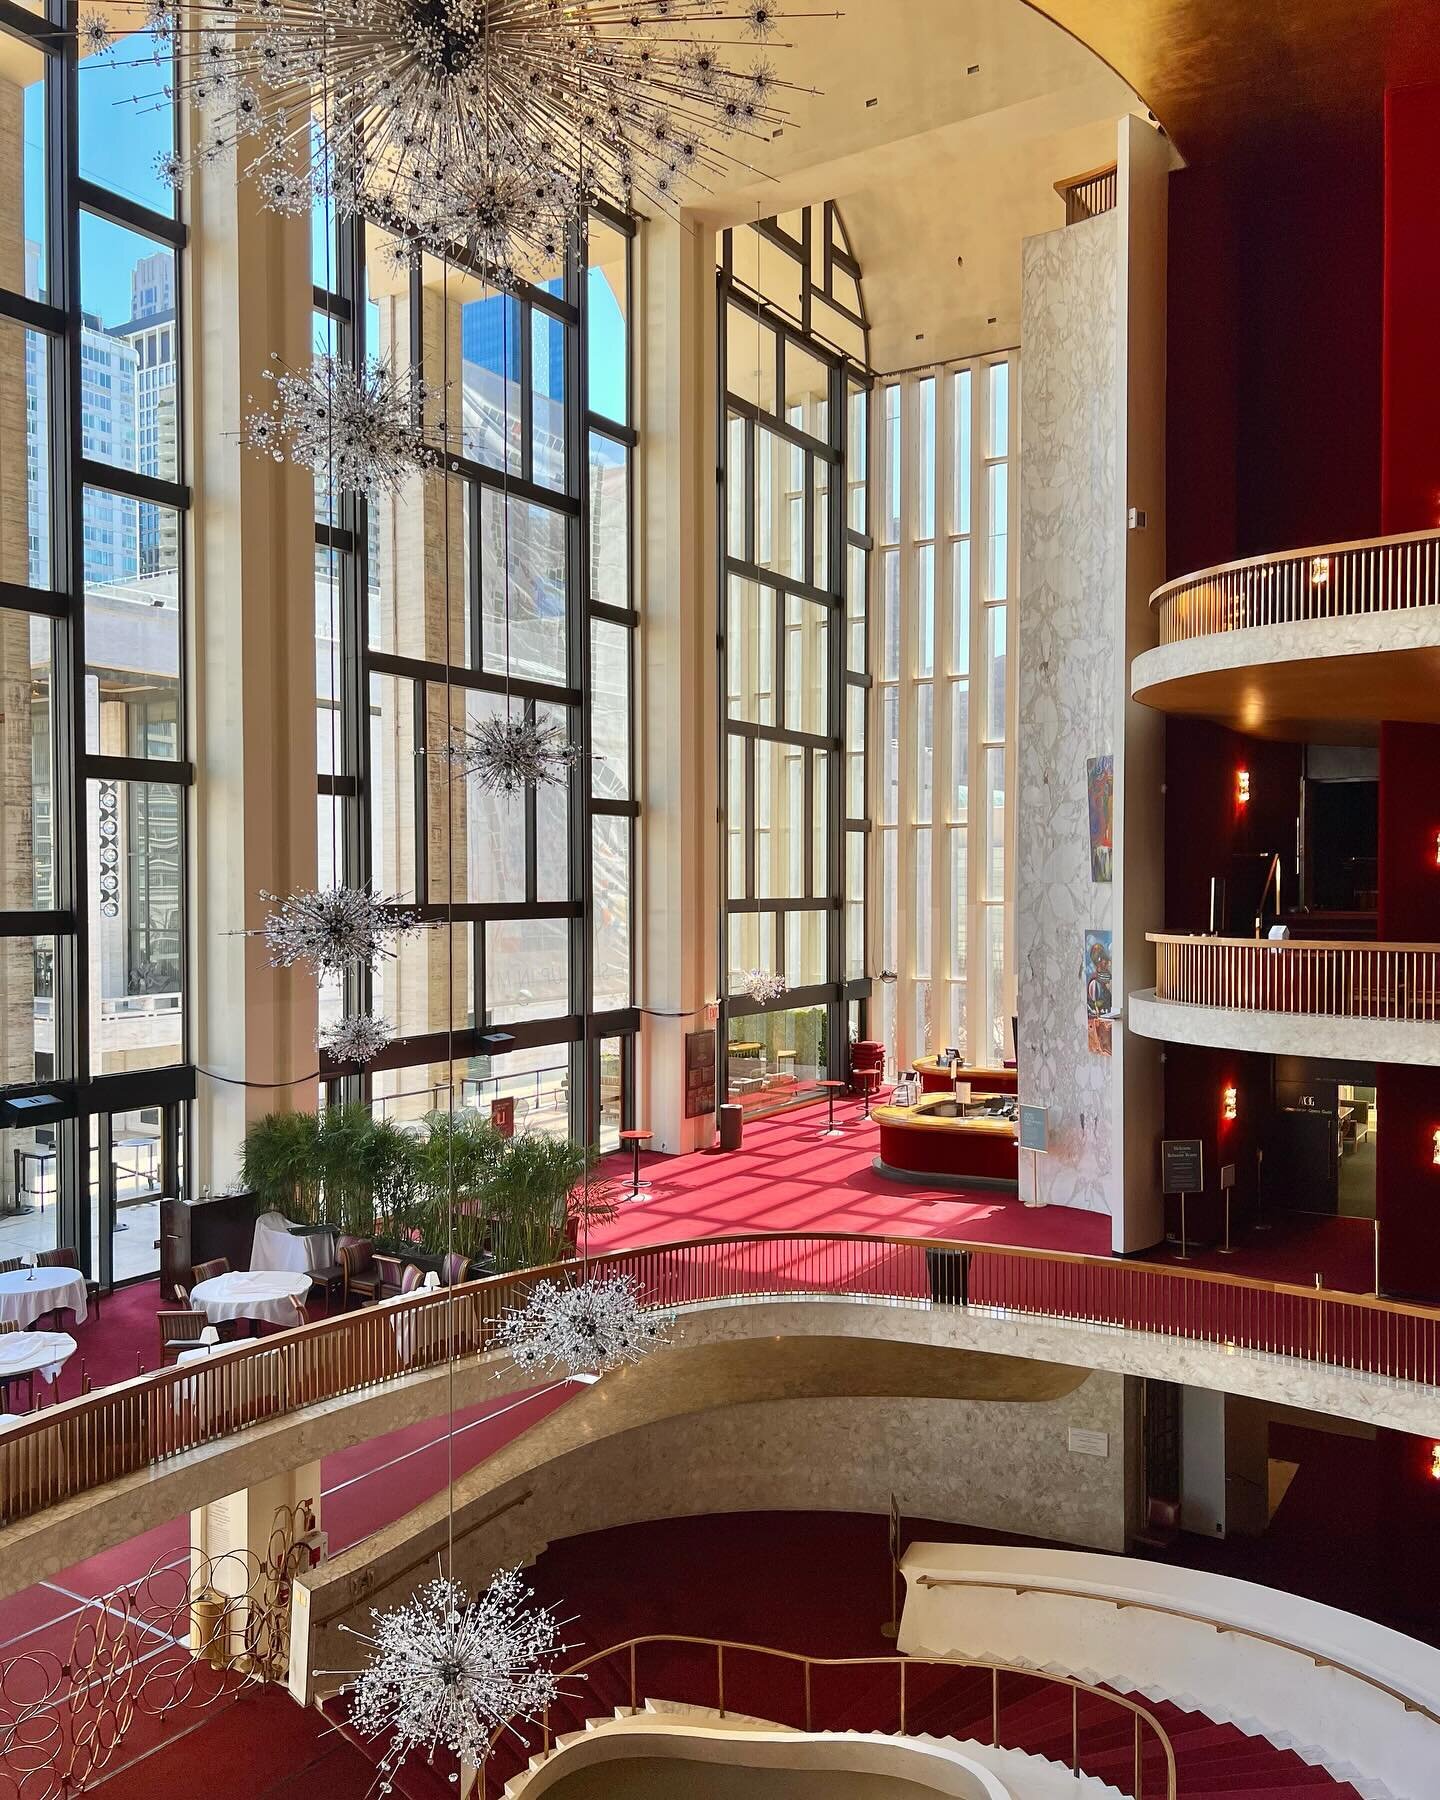 What a treat to visit and get a behind the scenes tour of the one and only @metopera! An iconic institution offering an ideal setting for corporate events. I&rsquo;m envisioning a festive and grand holiday celebration that would be one for the ages, 